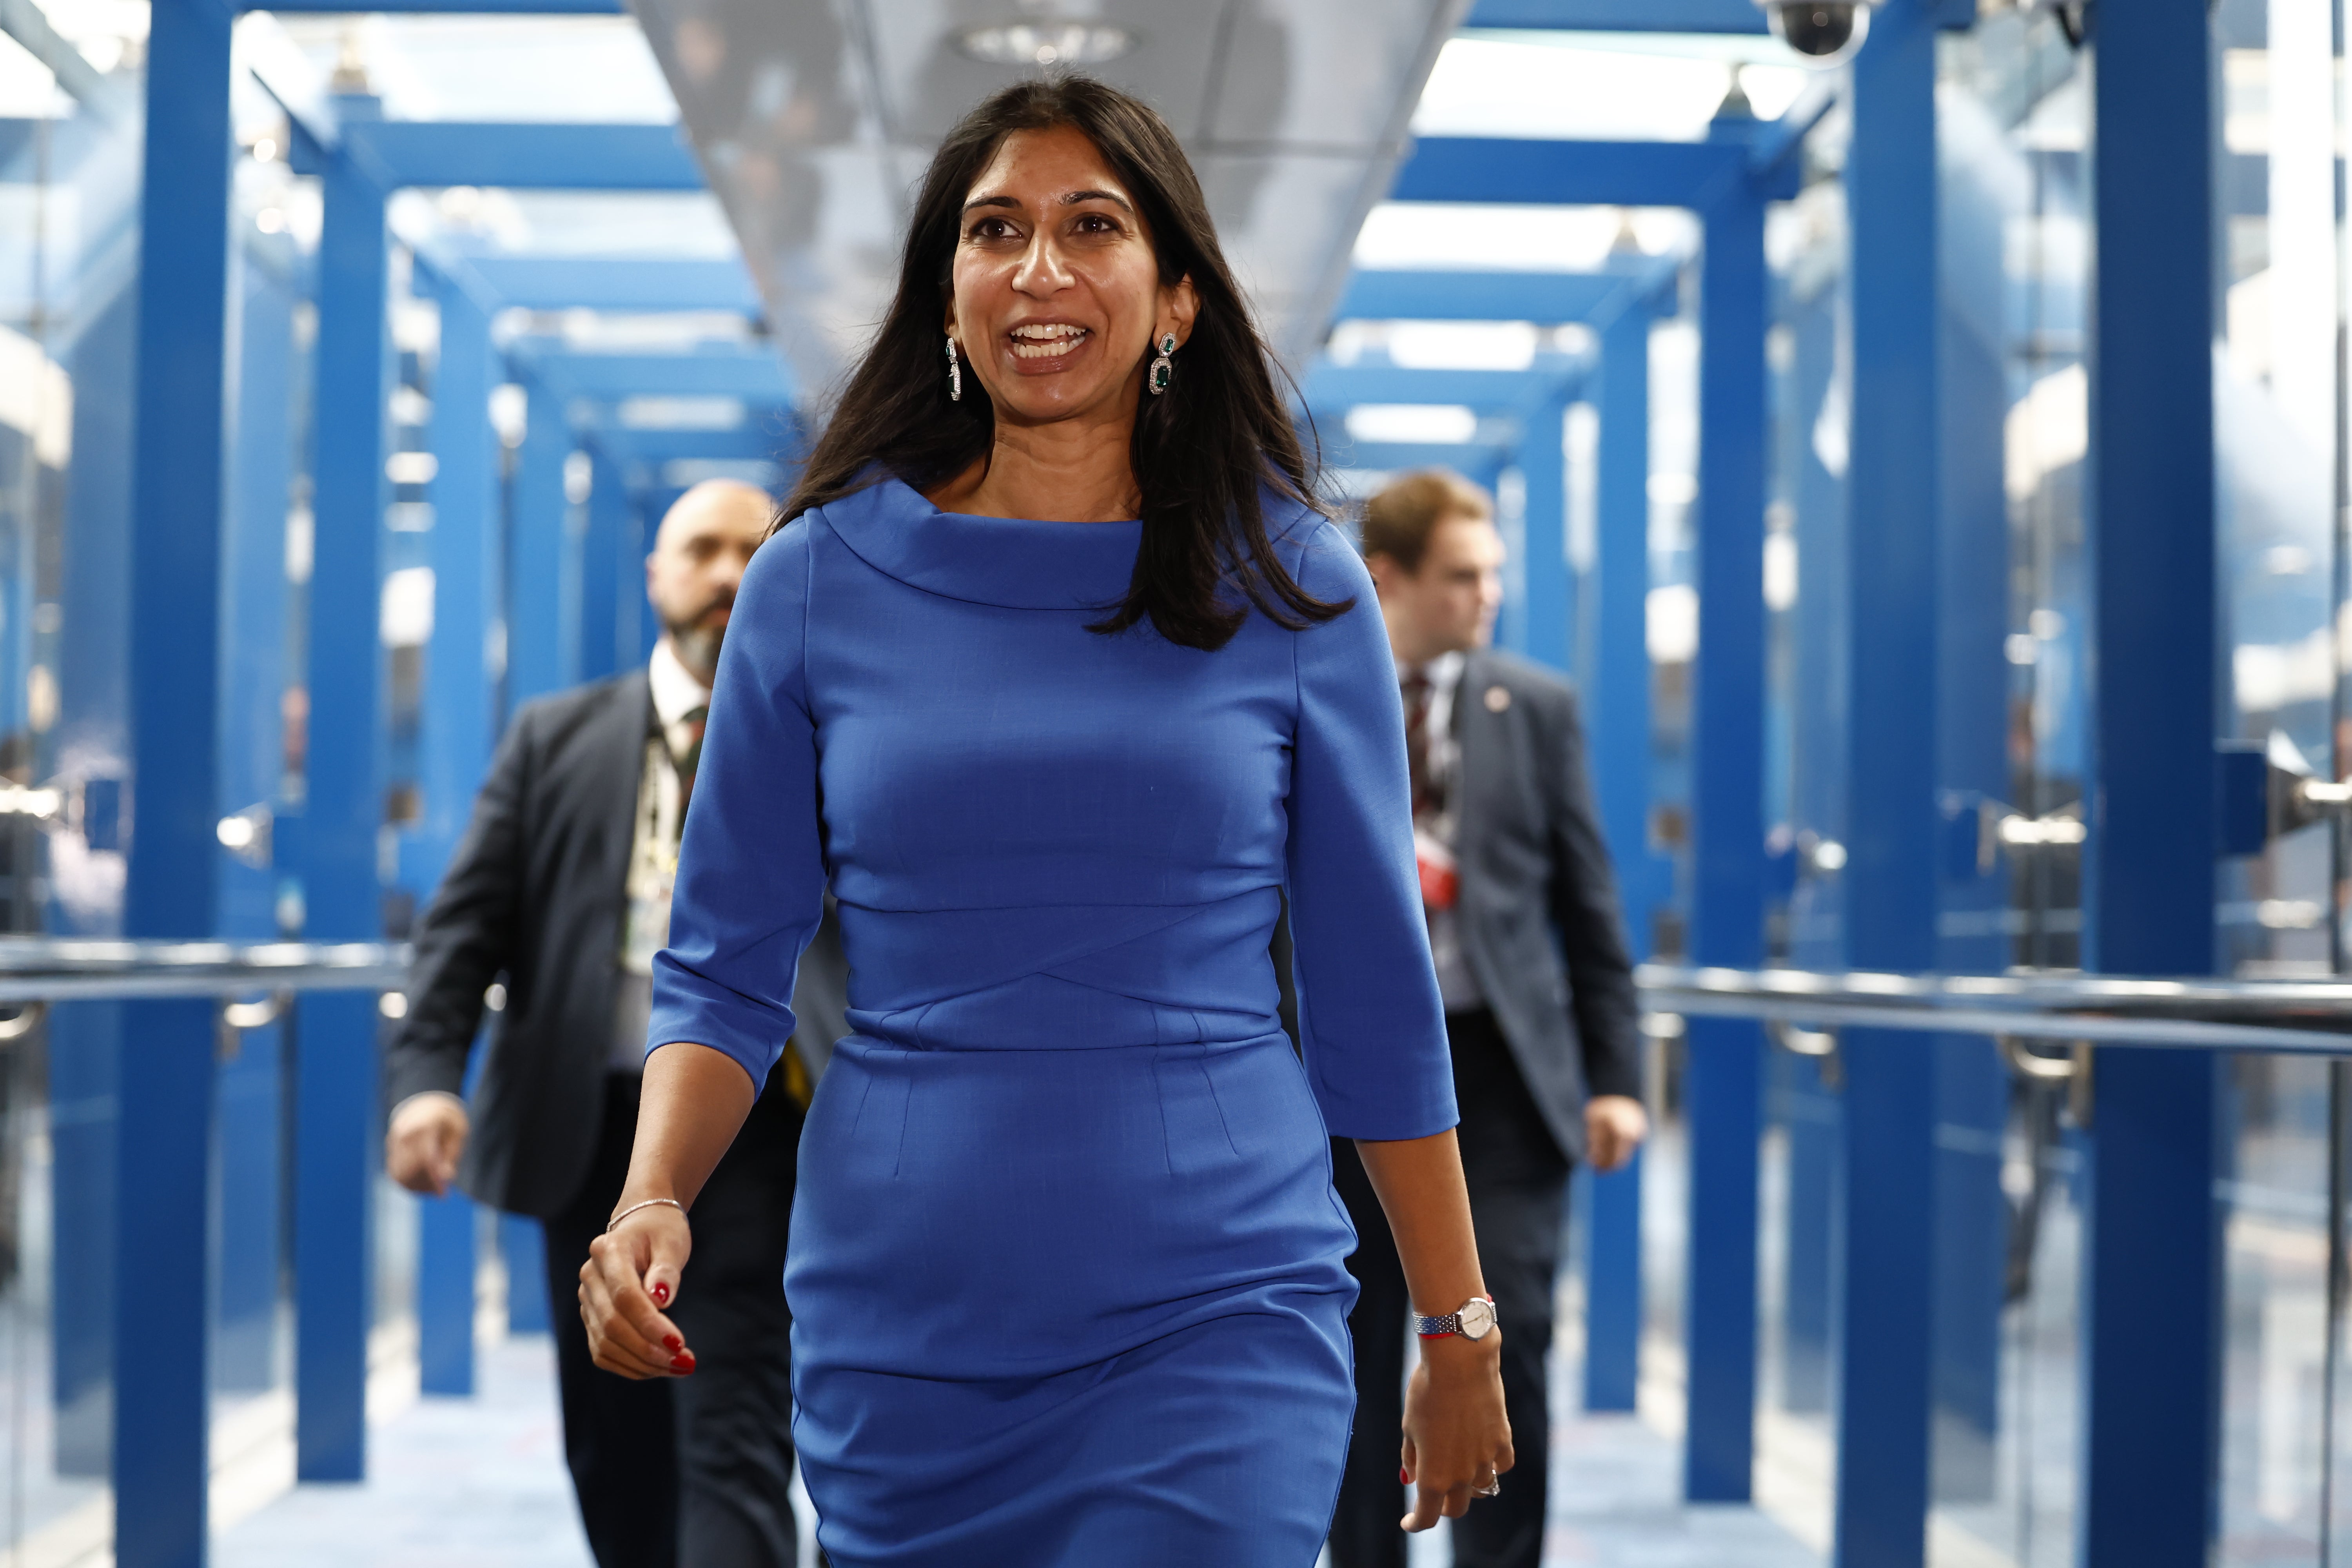 Suella Braverman at the Conservative conference in Birmingham on Tuesday